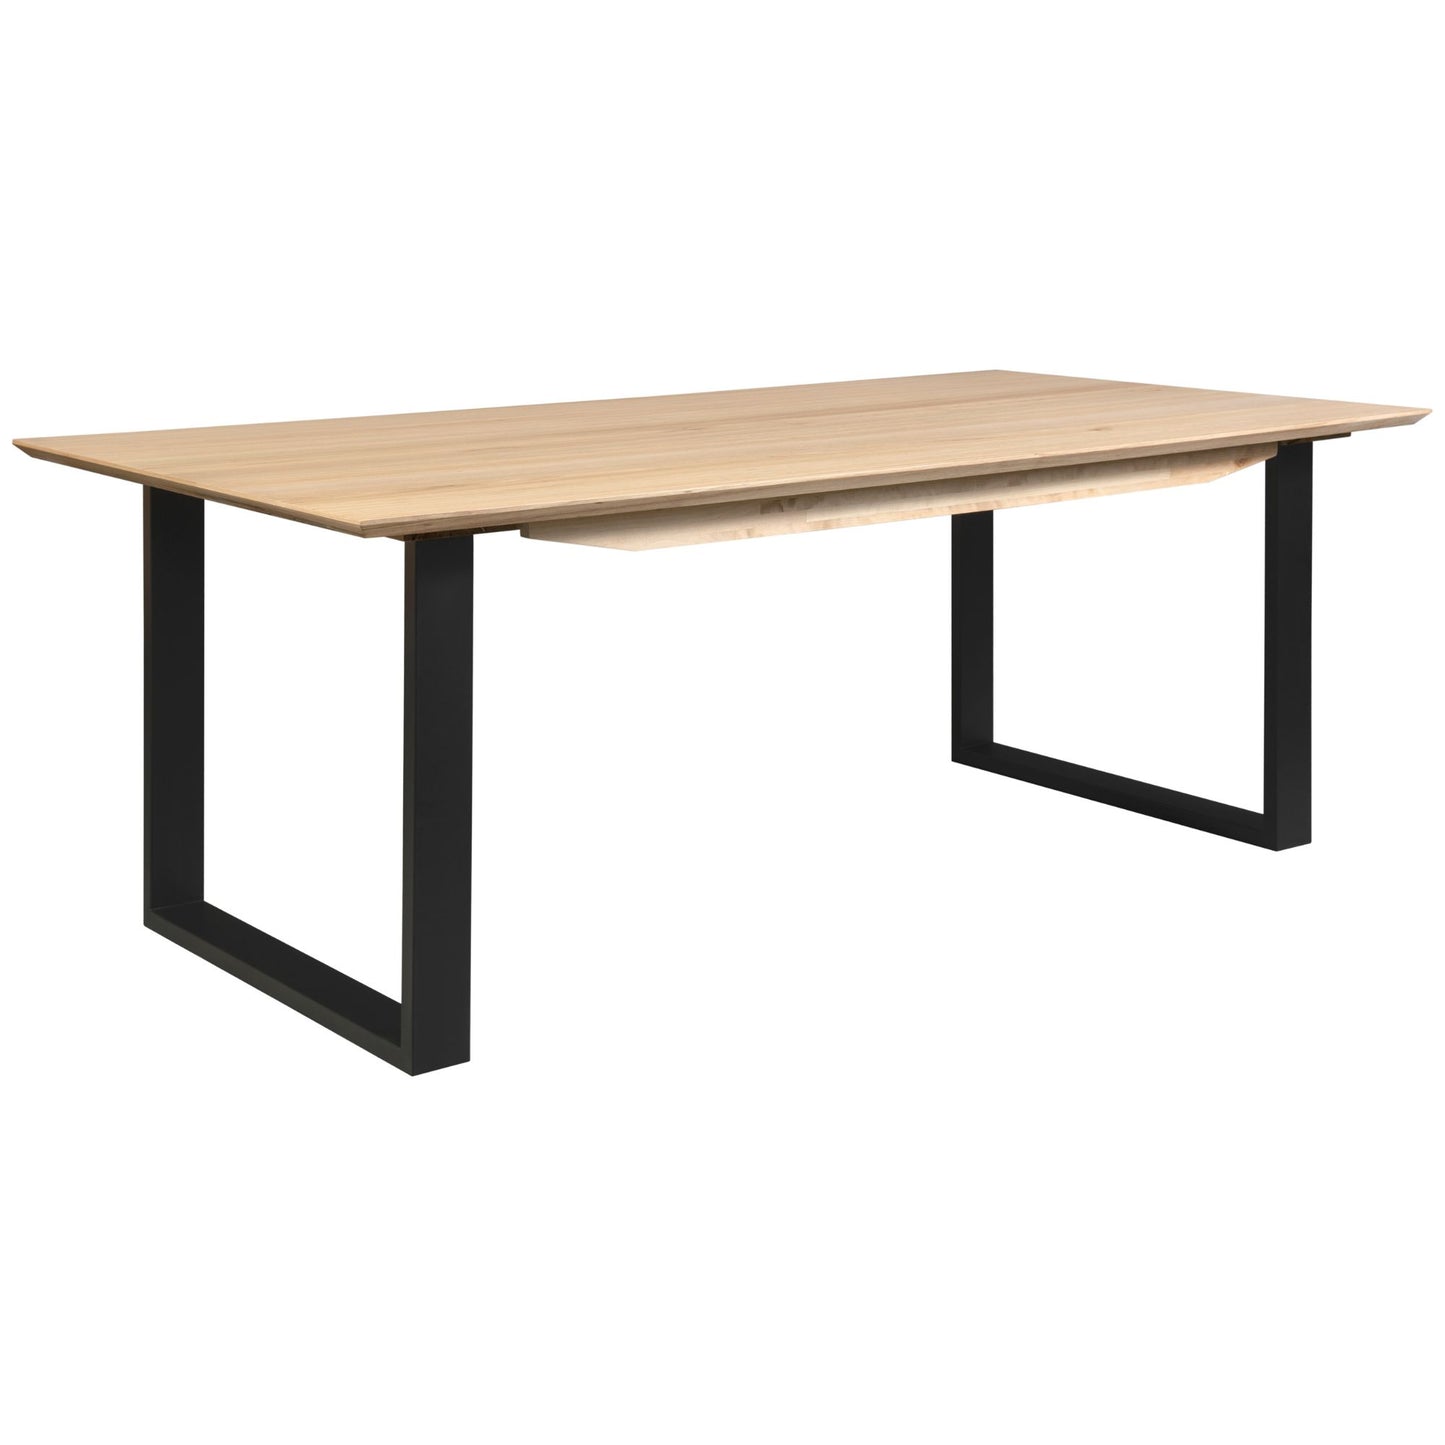 Aconite Solid Messmate Timber Wood with Black Metal Leg  Dining Table 180cm- Natural